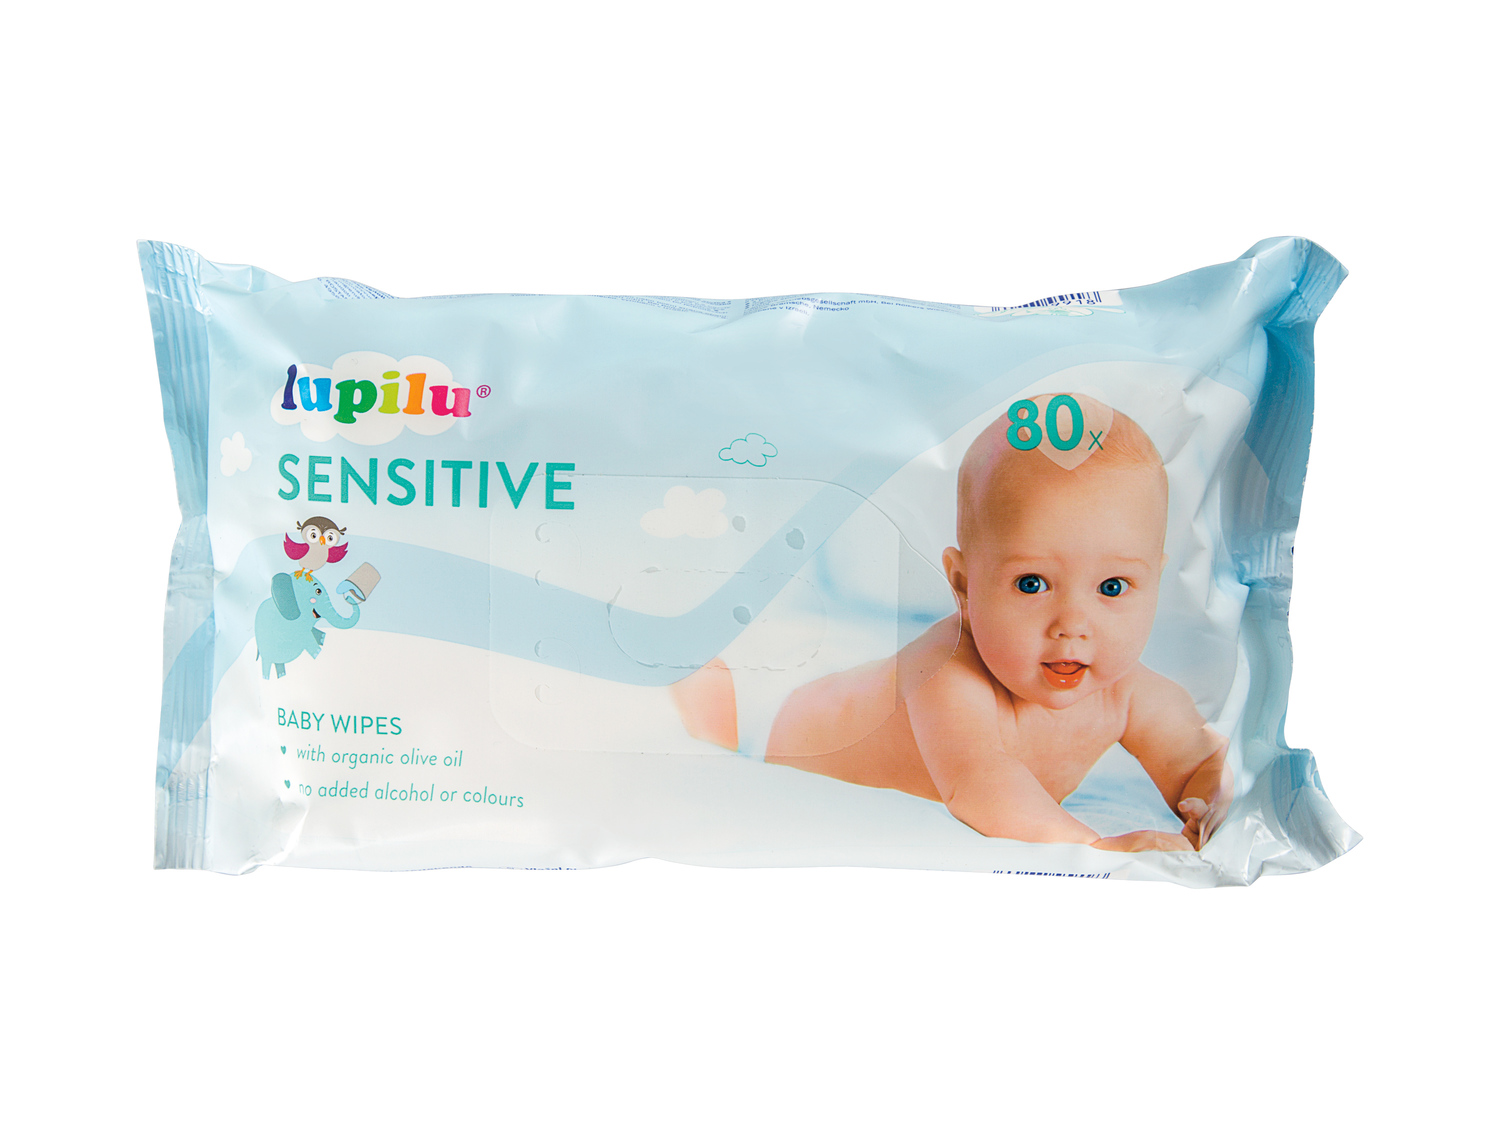 e mag pampers pants 5